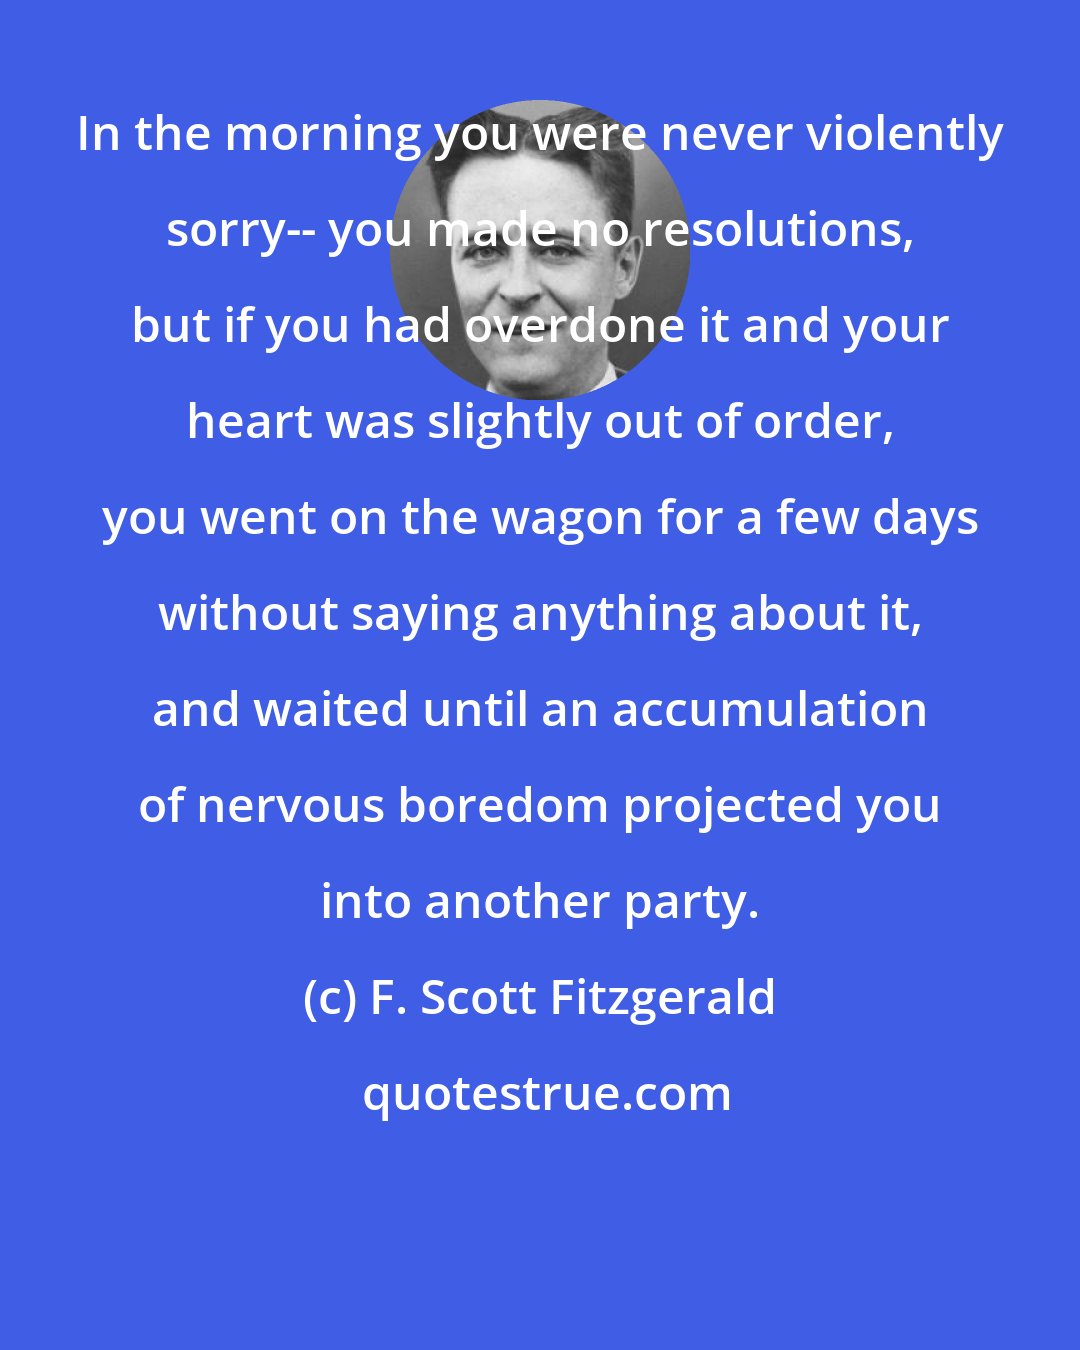 F. Scott Fitzgerald: In the morning you were never violently sorry-- you made no resolutions, but if you had overdone it and your heart was slightly out of order, you went on the wagon for a few days without saying anything about it, and waited until an accumulation of nervous boredom projected you into another party.